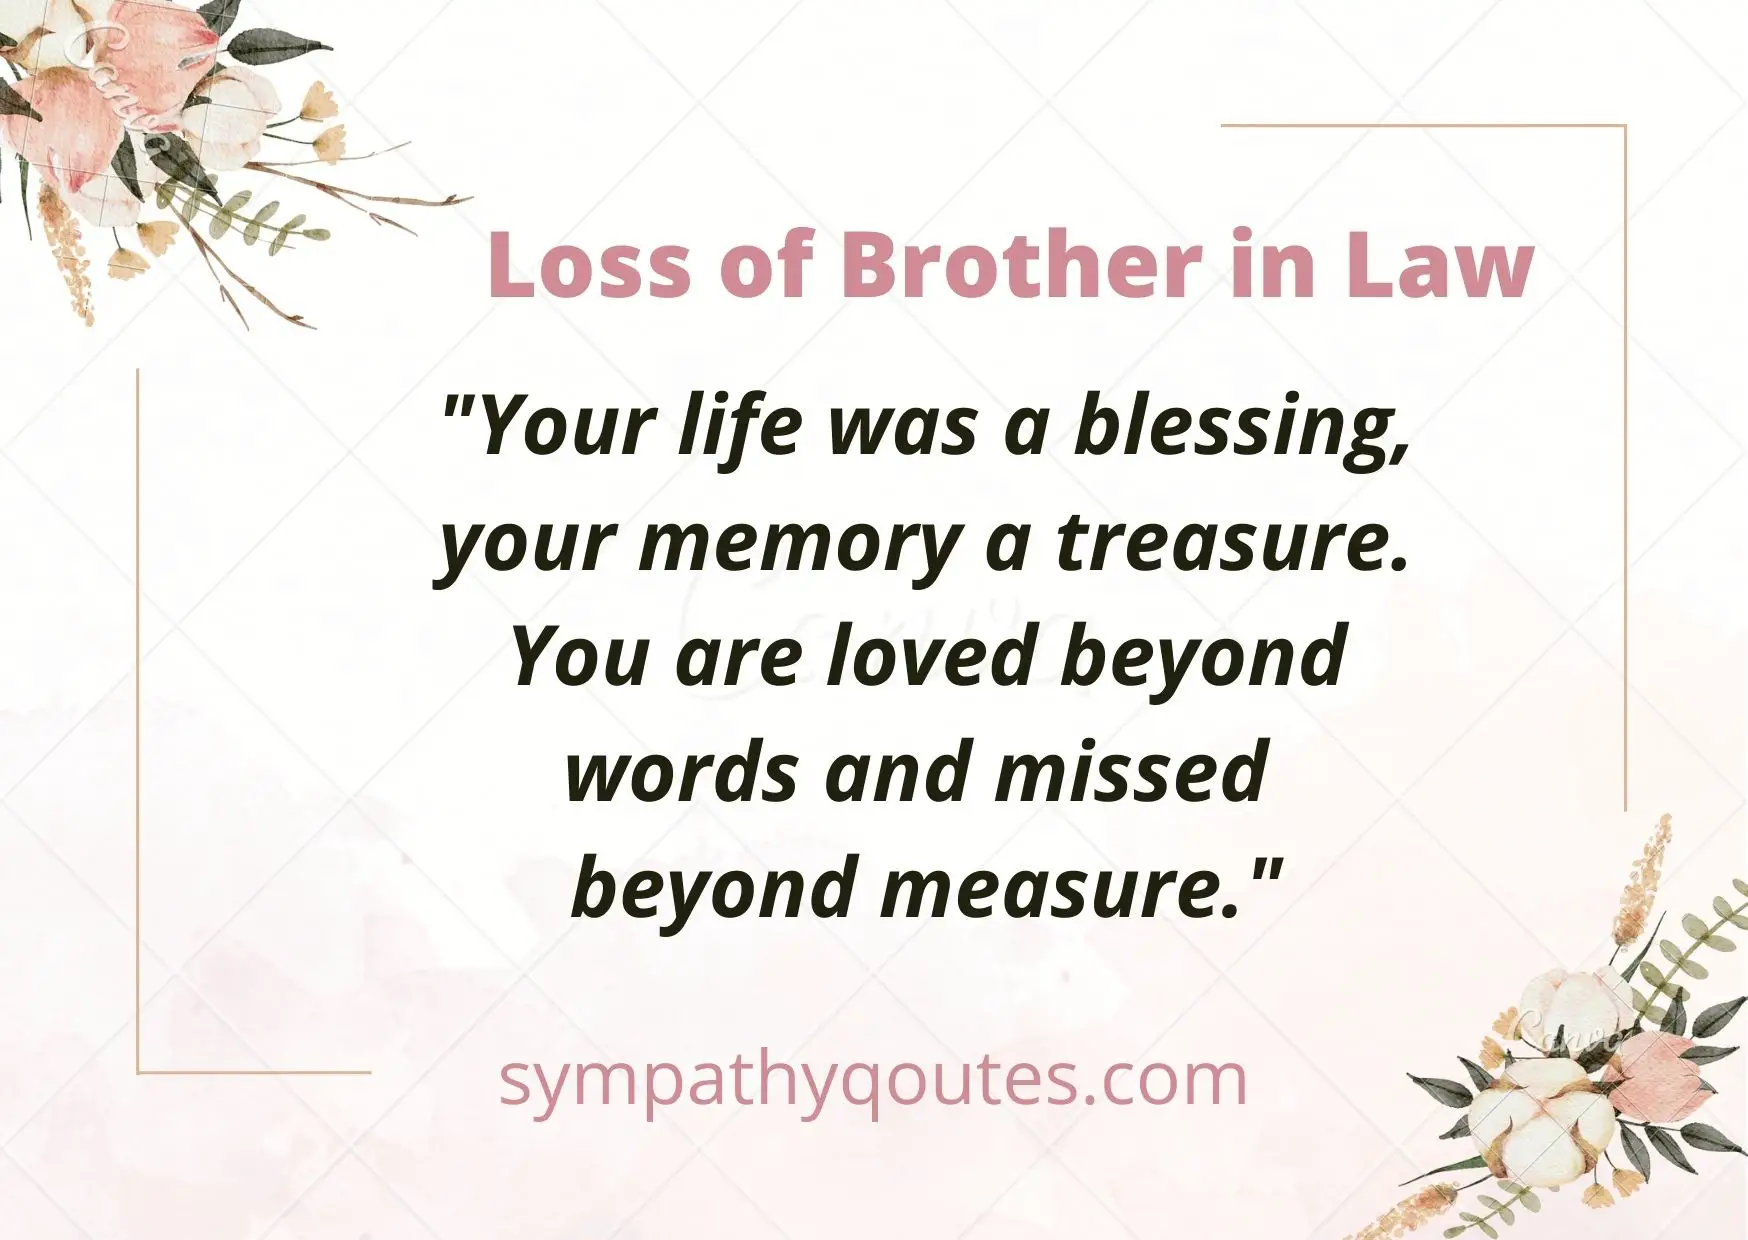  Sympathy Quotes for Loss of Brother in Law